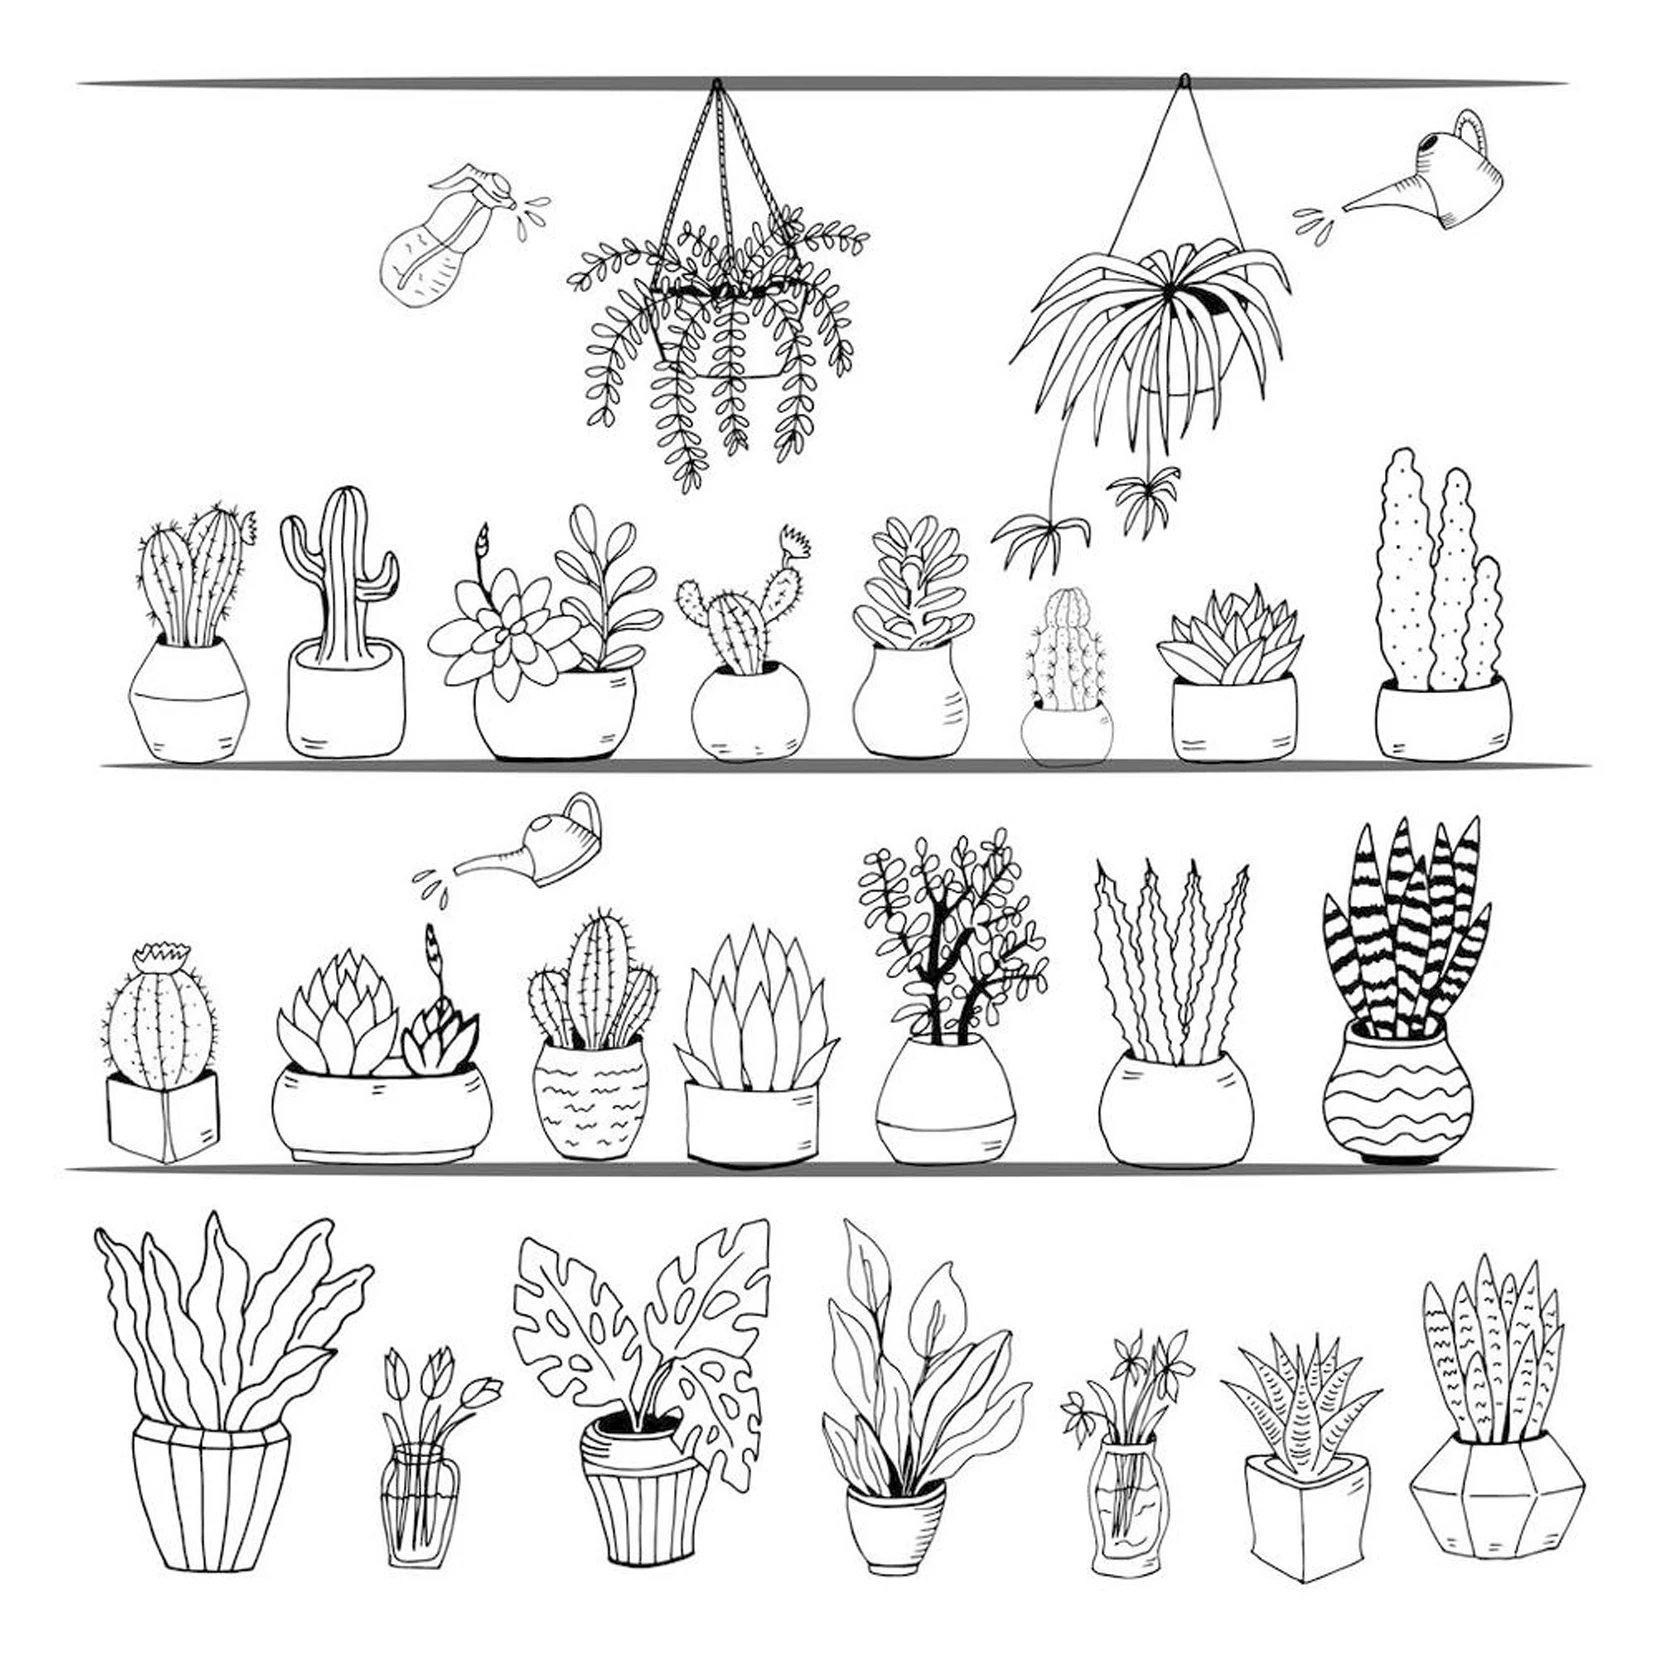 

DABOXIBO Cactus/Spider Plant/Green Plant Clear Stamps Mold For DIY Scrapbooking Cards Making Decorate Crafts 2020 NEW Arrival